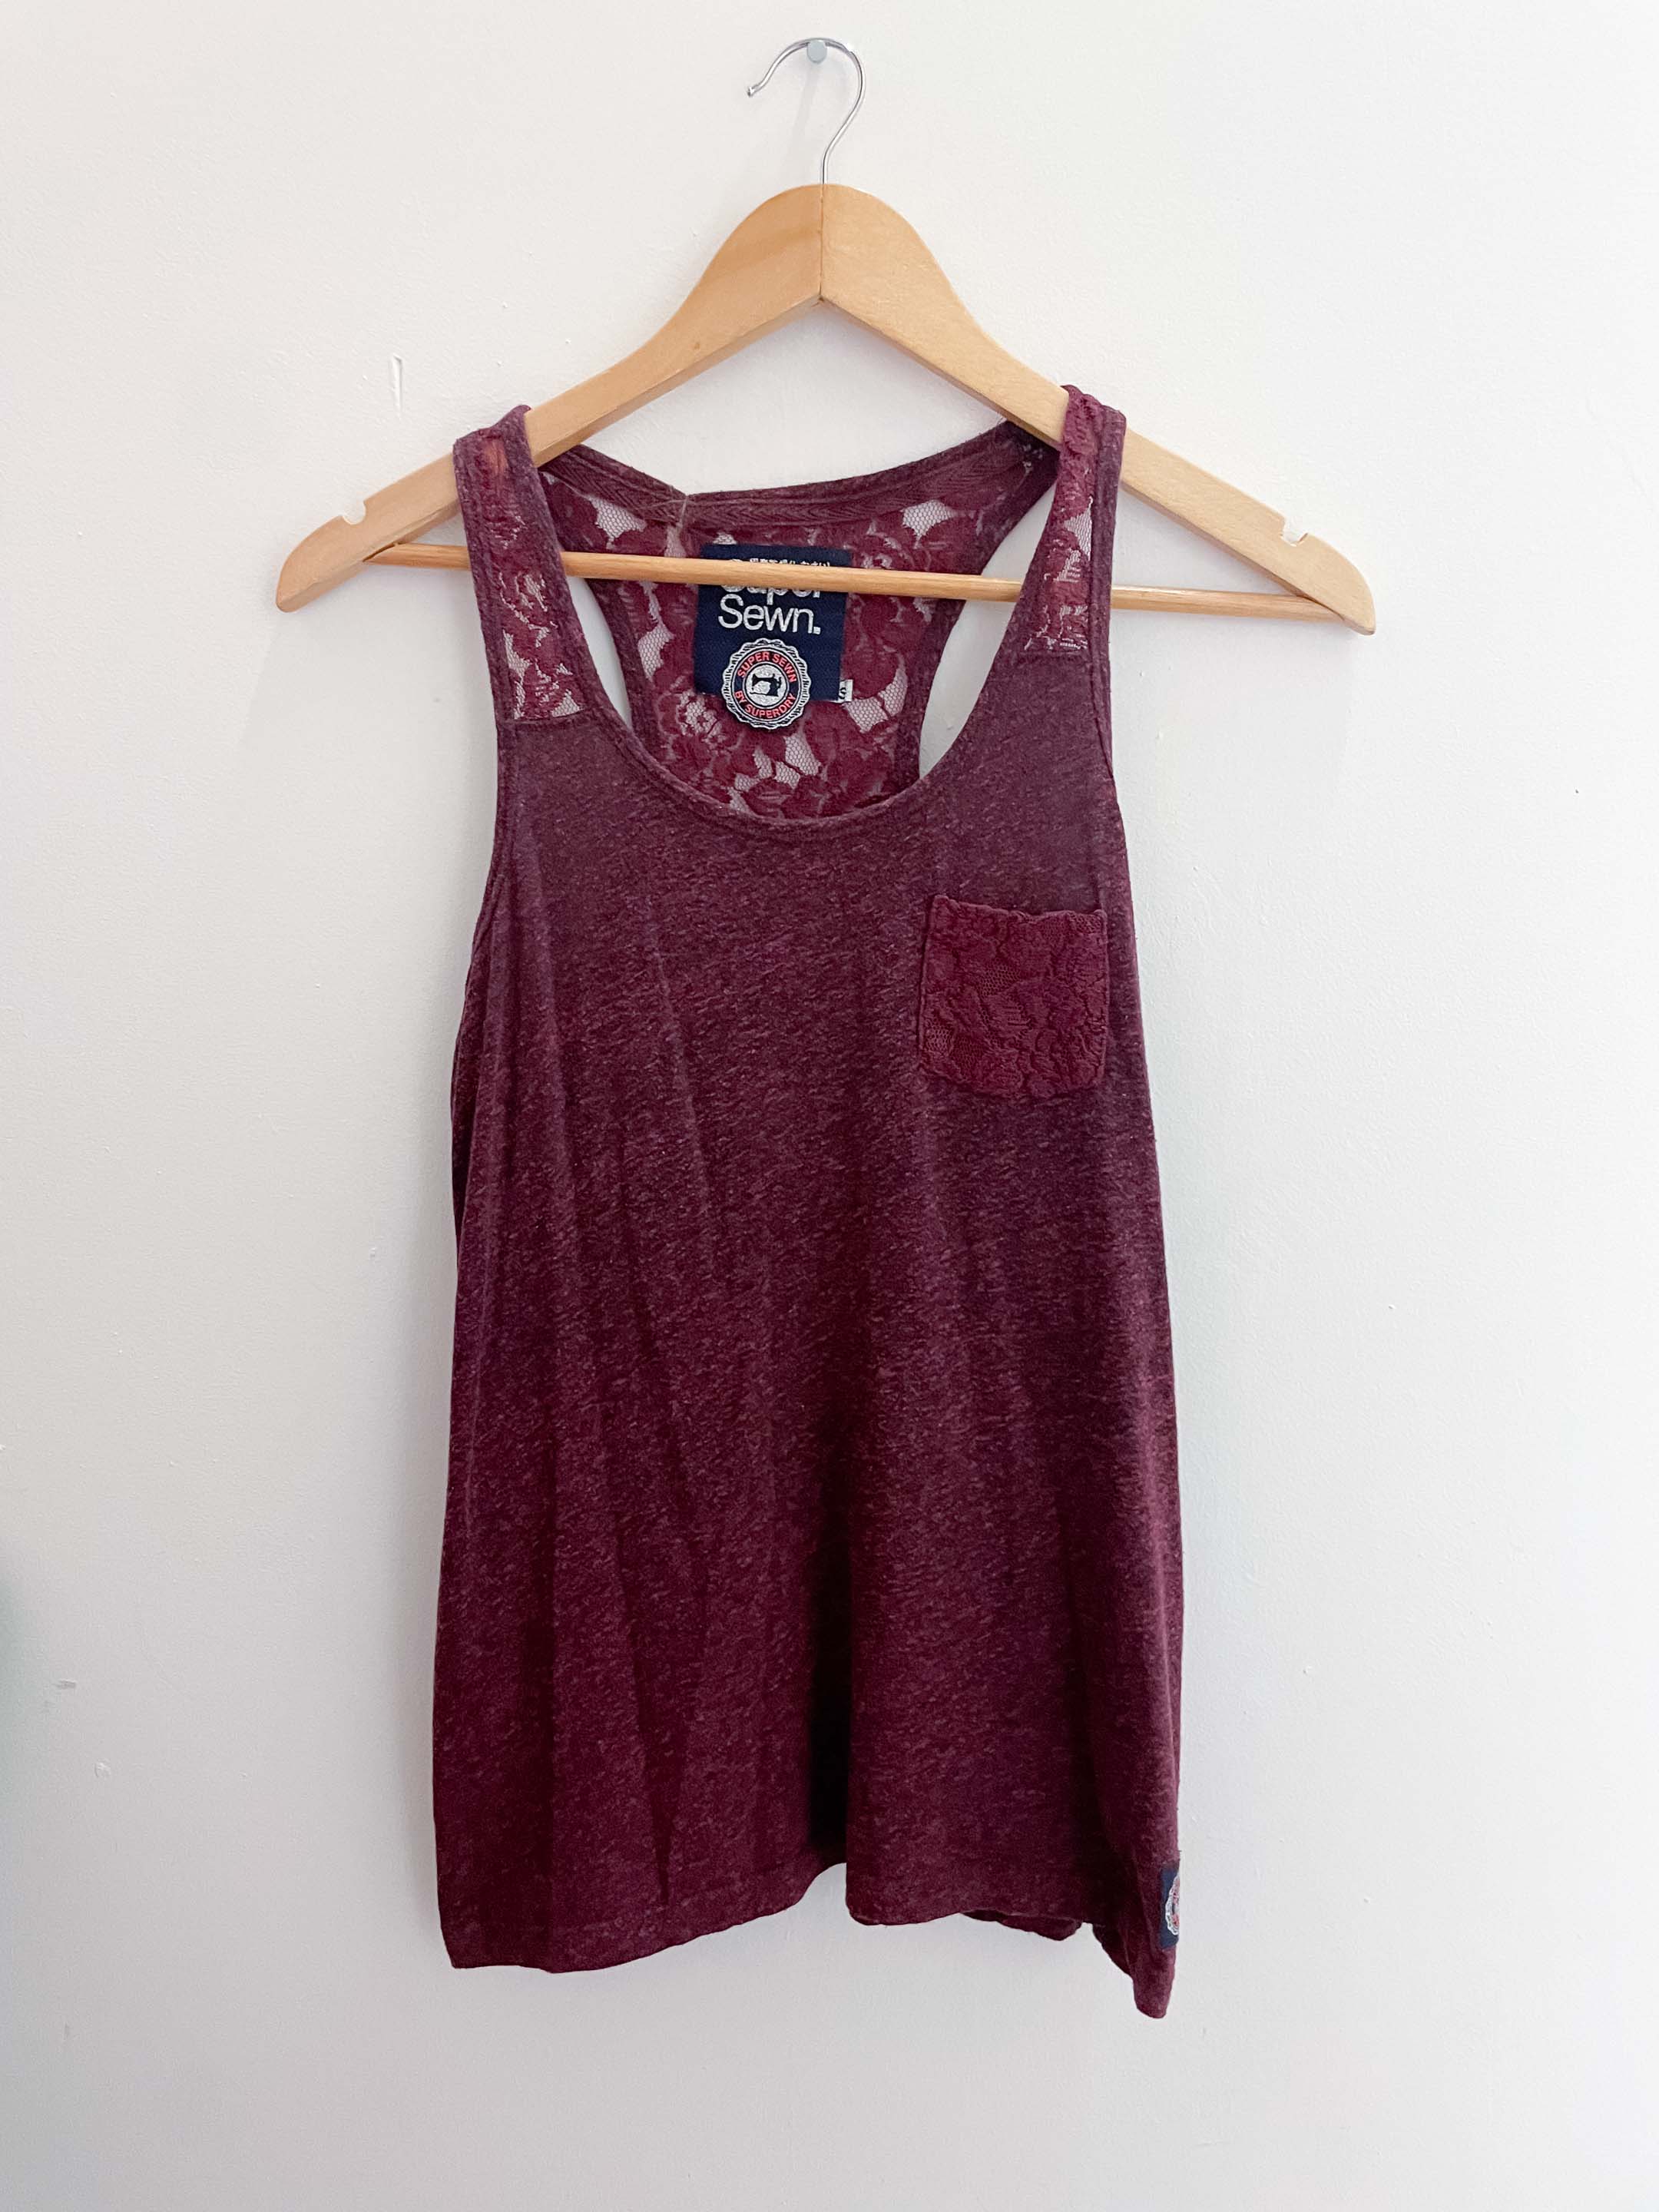 Vintage superdry women sleeveless brown small top